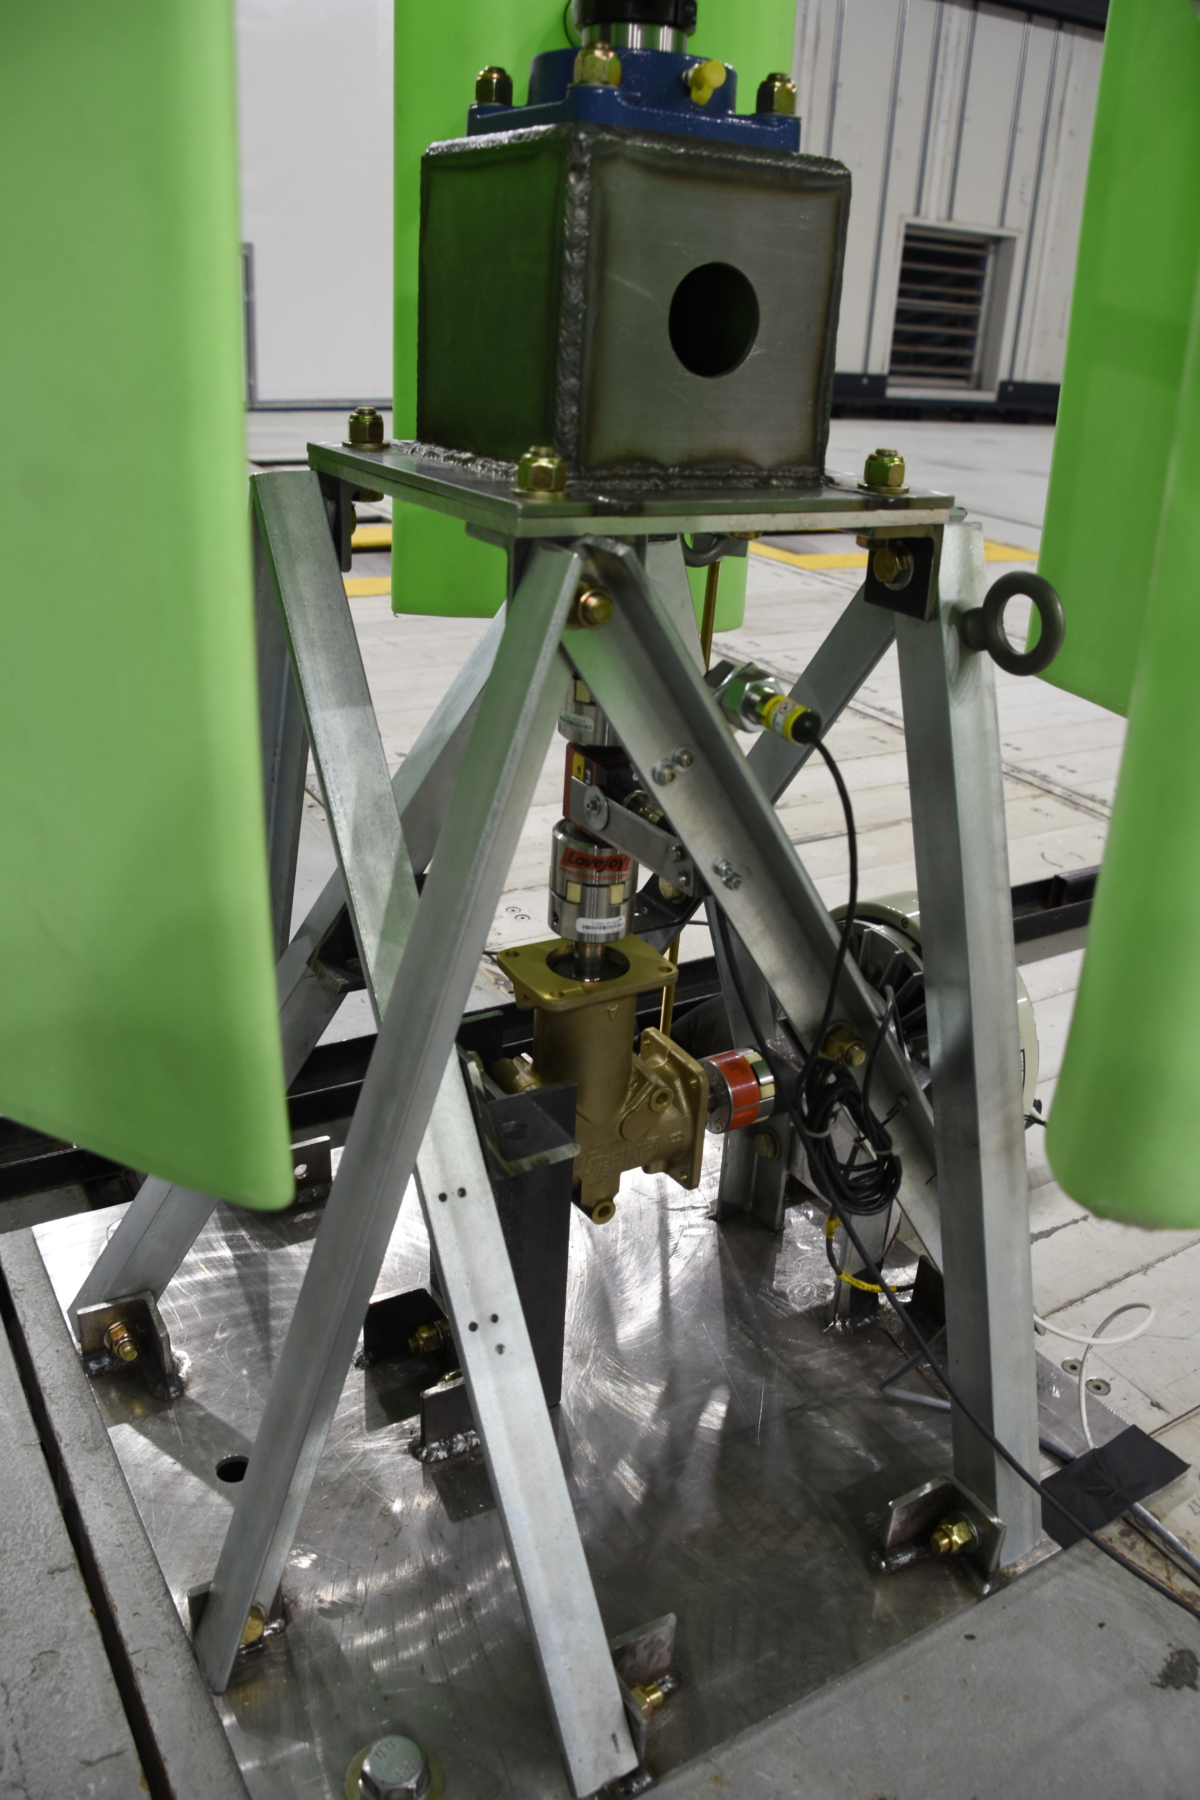 Vertical axis wind turbine test stand with torque sensor